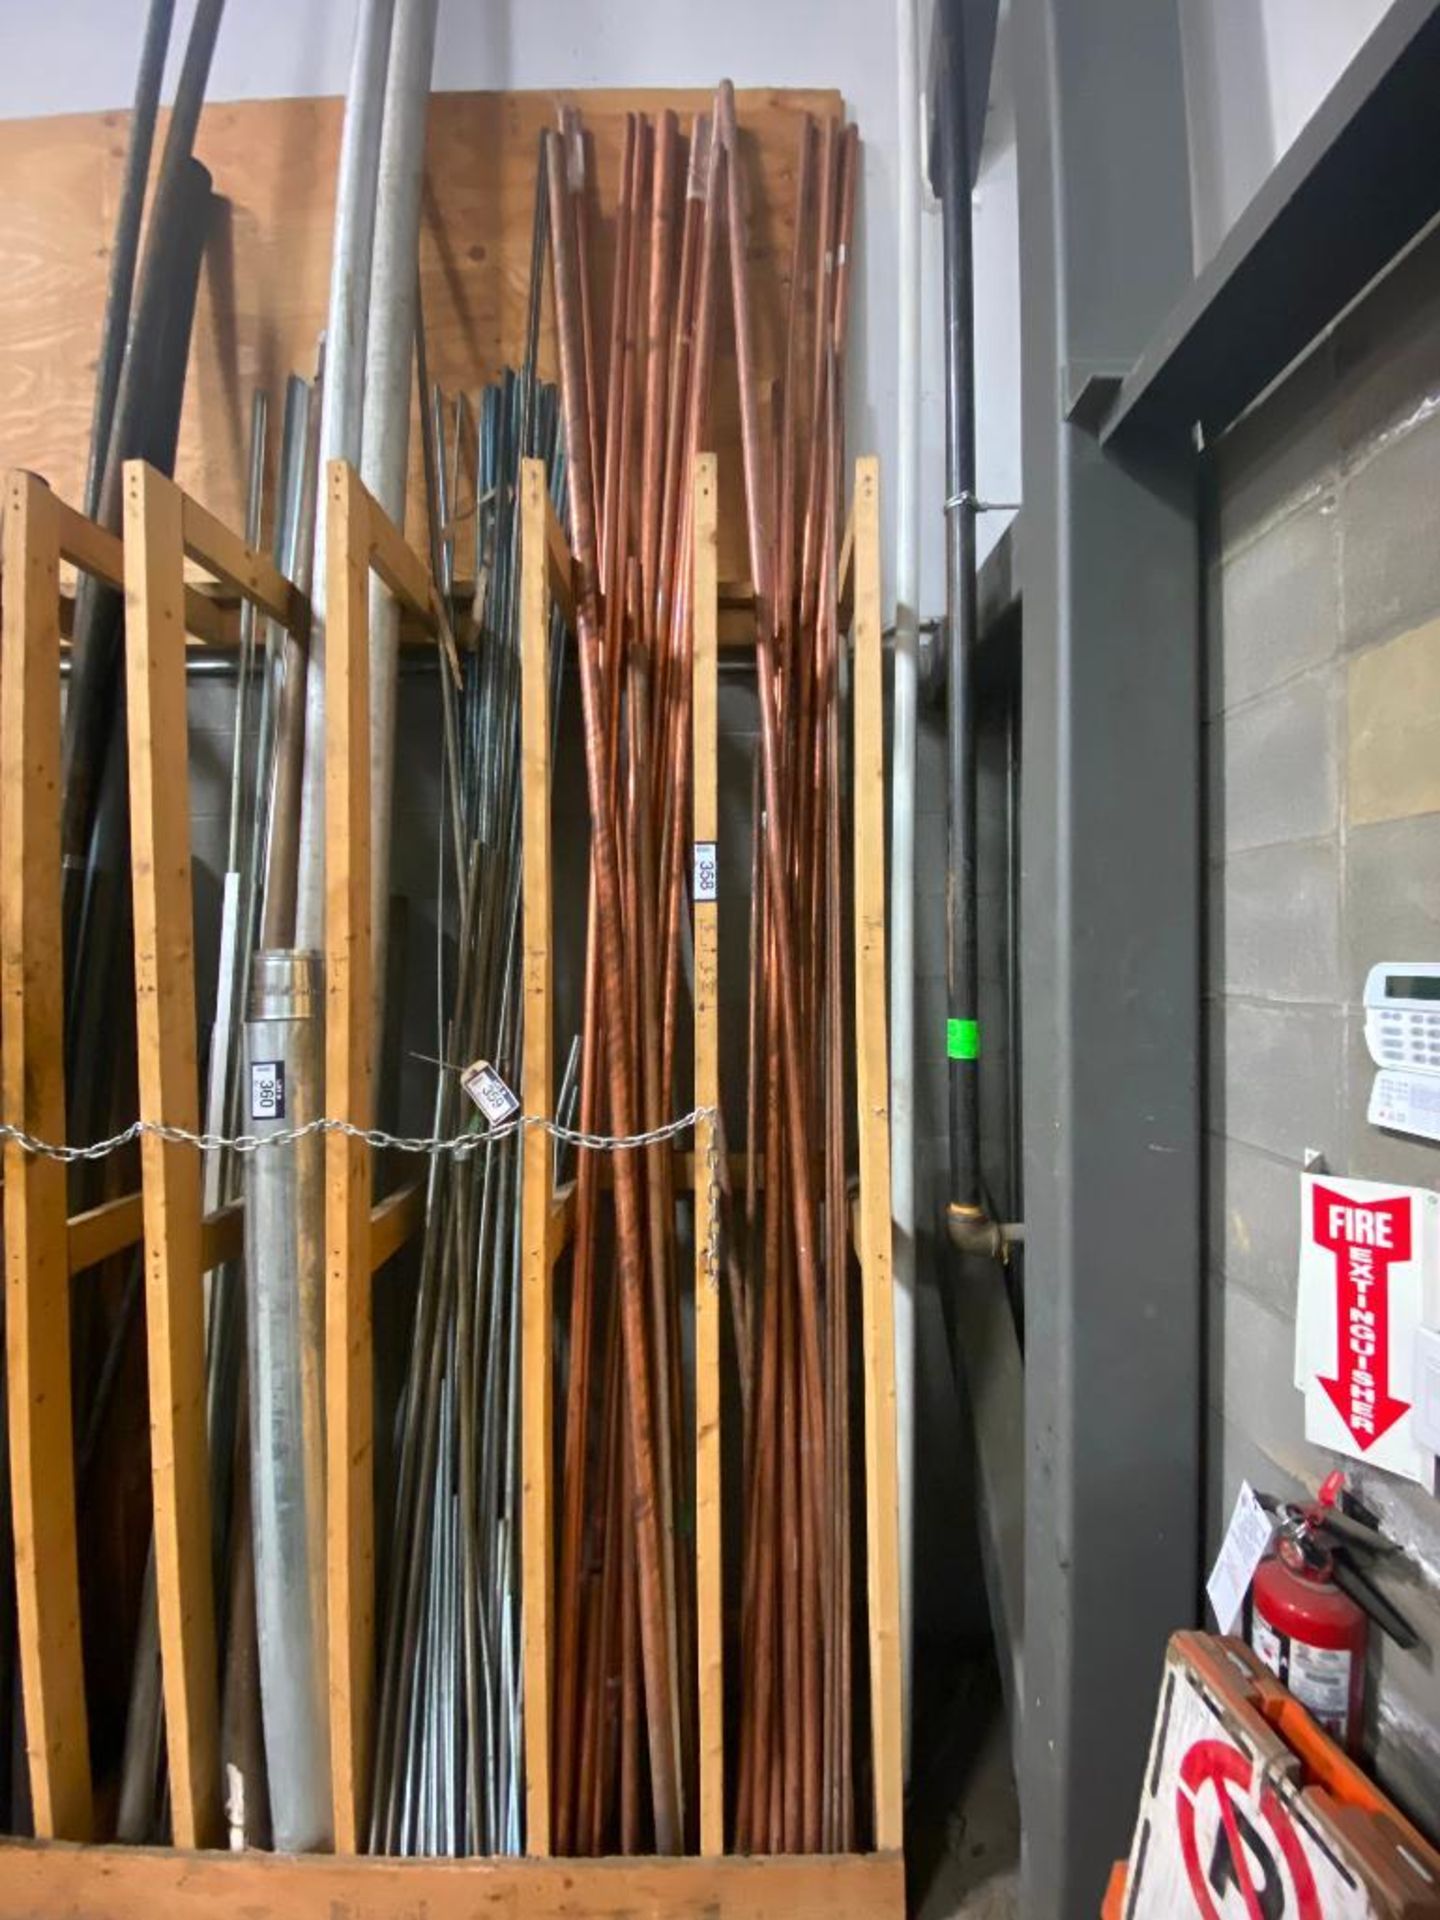 Lot of Asst. Copper Piping, Copper Rods, etc.